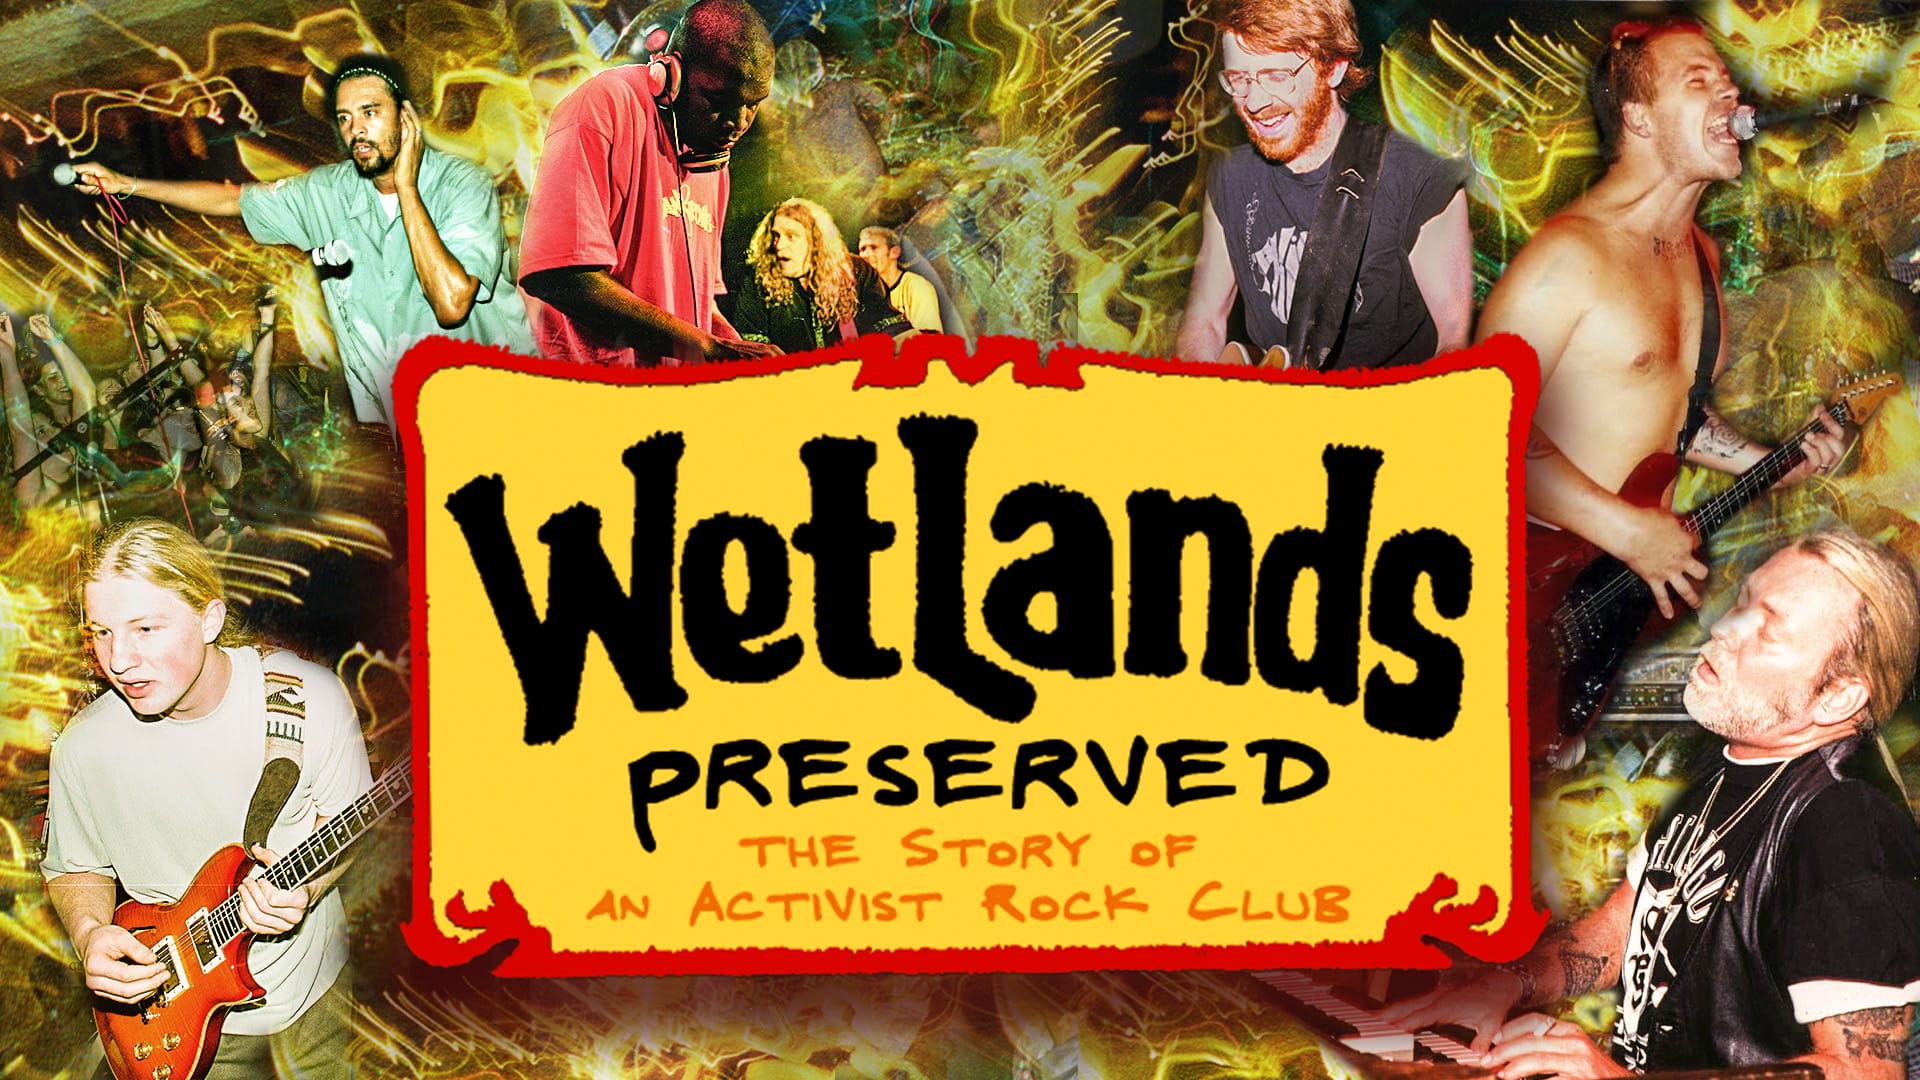 Celebrate 35 Years of Wetlands Preserve with Documentary Featuring Bob Weir, Phish, Dave Matthews Band, The Roots and more